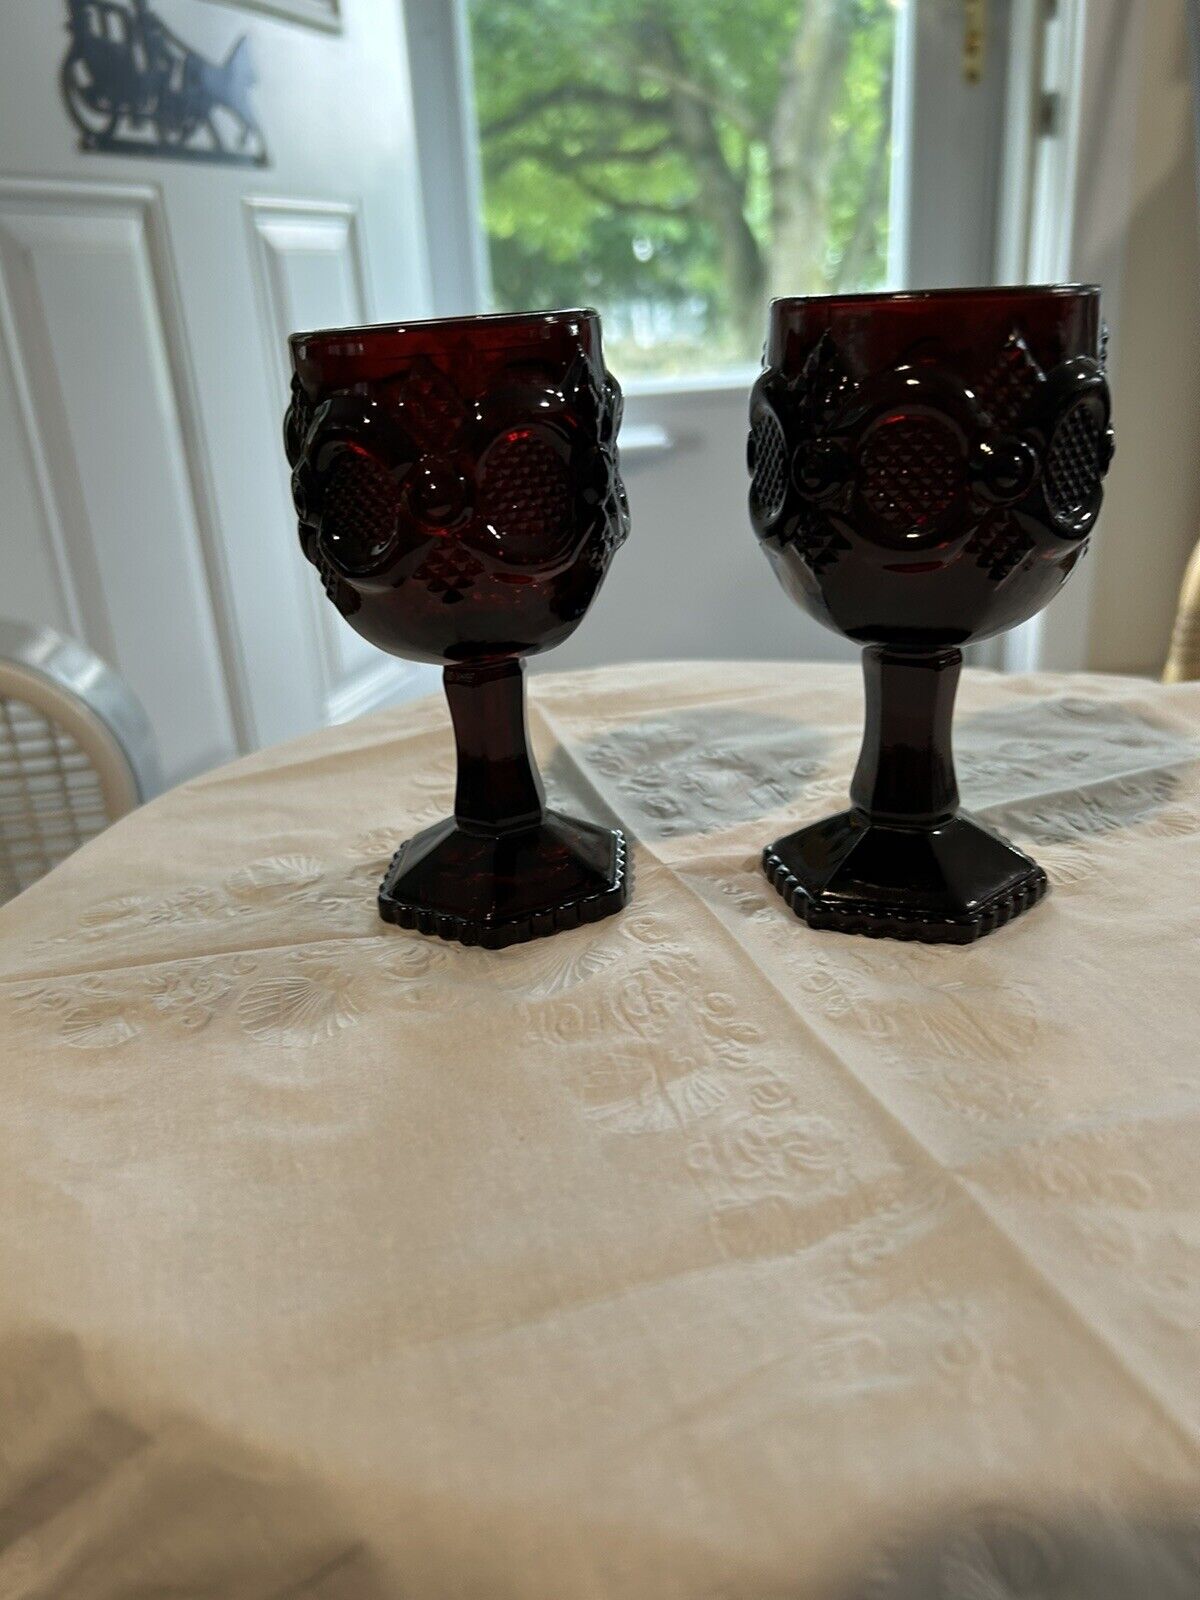 Vintage Avon 1876 Ruby red wine glasses set of two